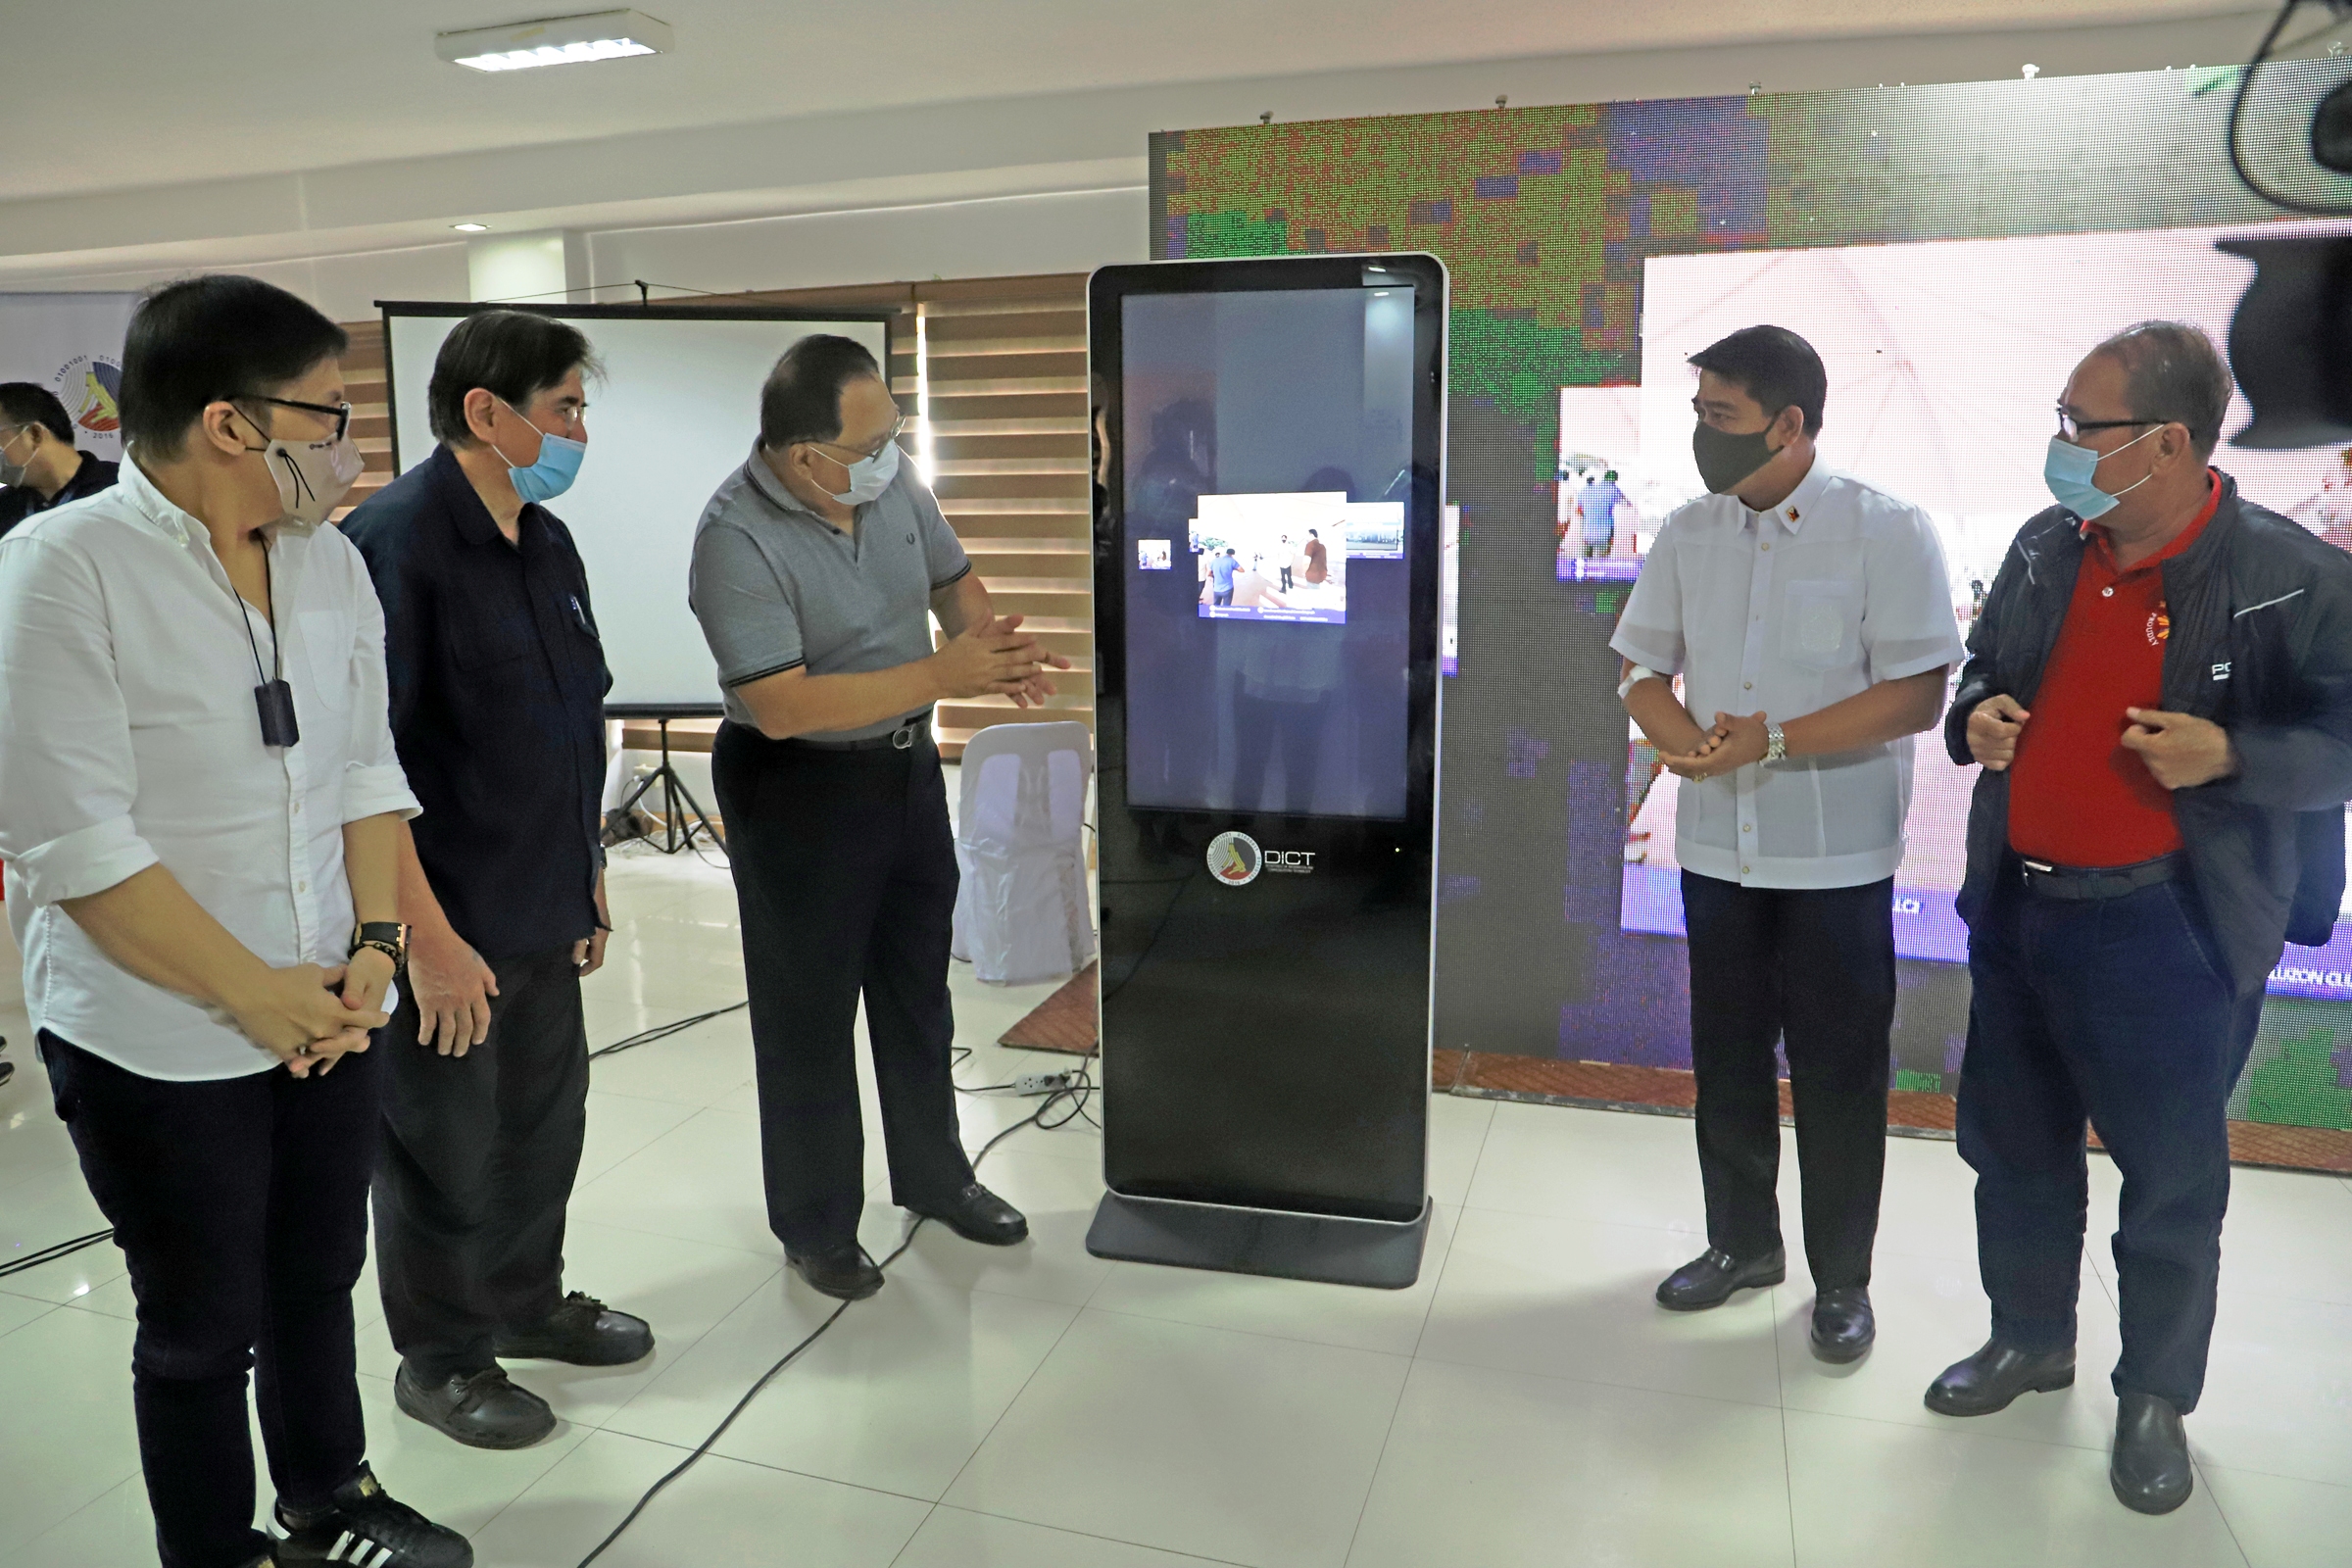 Officials of the Department of Information and Communications Technology (DICT) and Zambales province launch a free Wi-Fi program in Iba, Zambales on Tuesday (Sept. 29). The occasion was led by DICT Secretary Gregorio Honasan (second from left) and Gov. Hermogenes Ebdane (third from left). CONTRIBUTED PHOTO